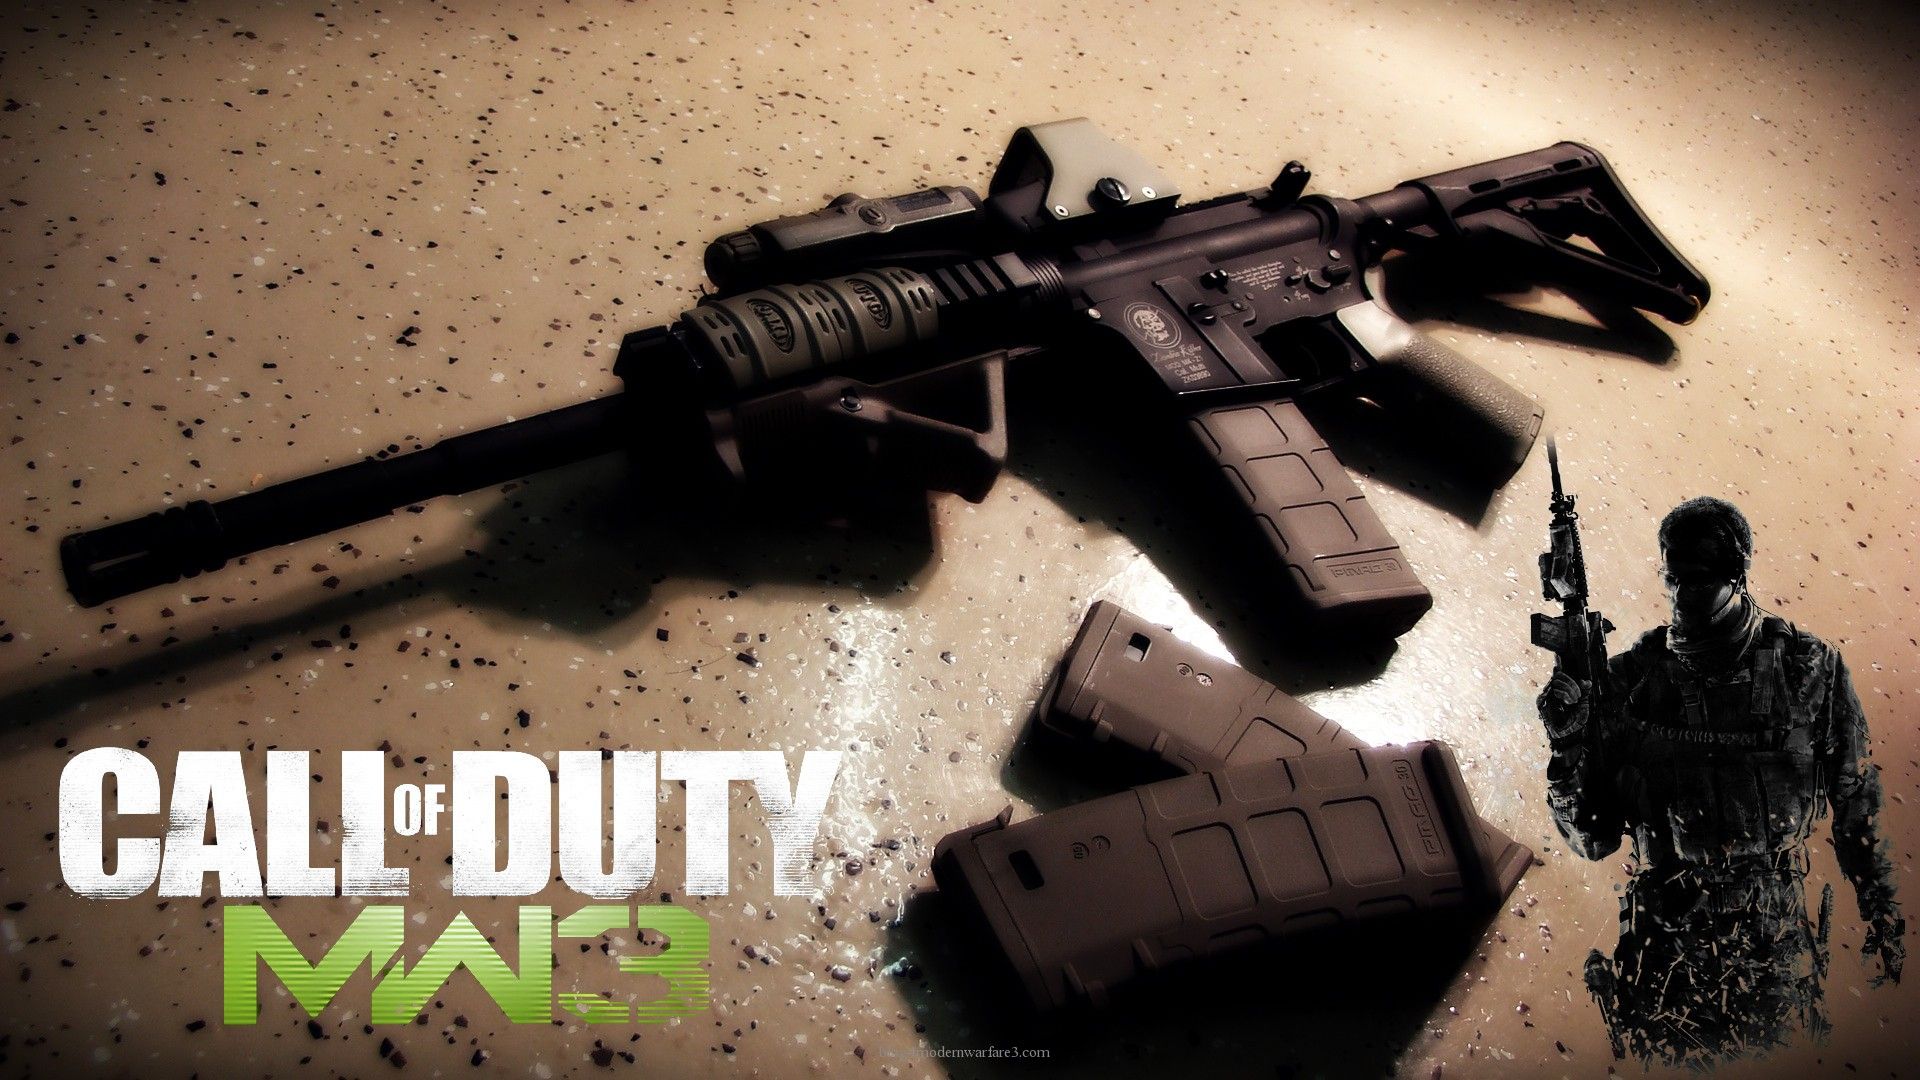 HD Quality War Game Call of Duty MW3 Wallpapers 12 Full Size